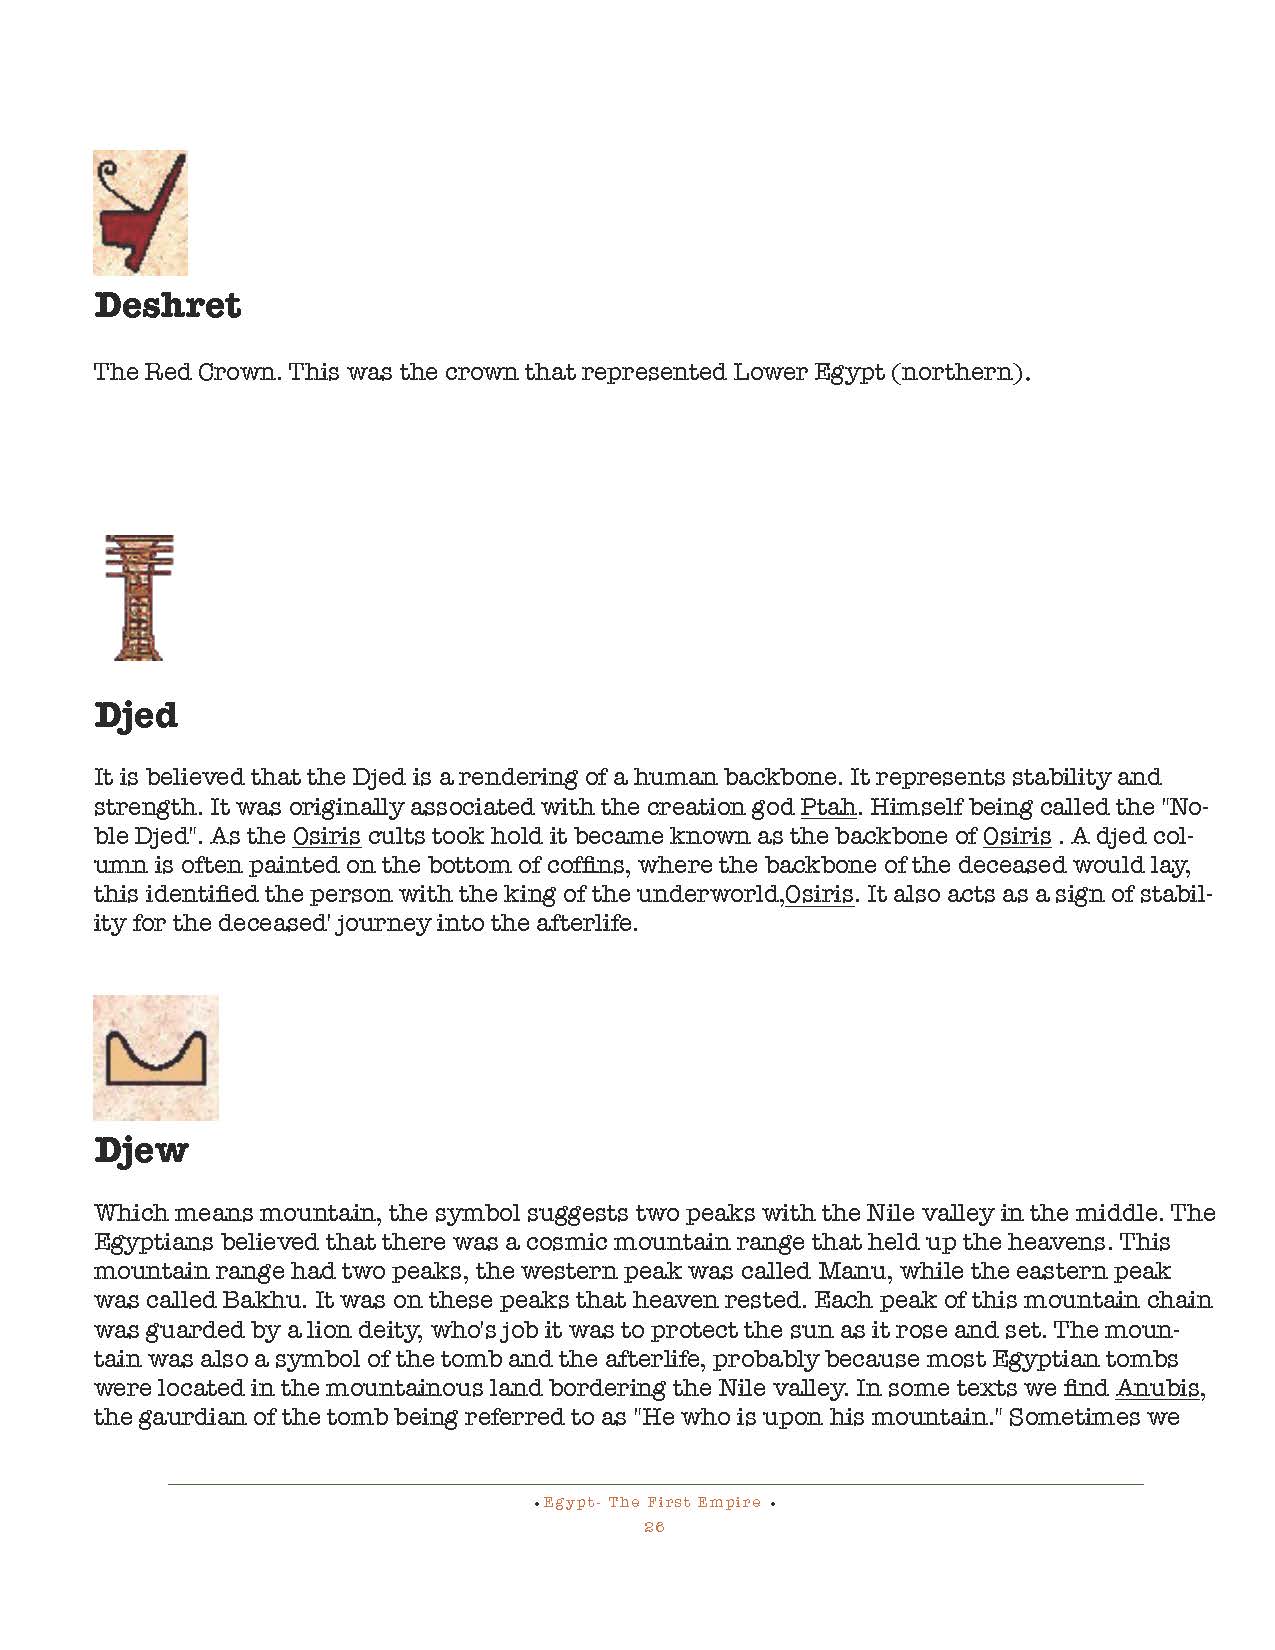 HOCE- Egypt  (First Empire) Notes_Page_026.jpg